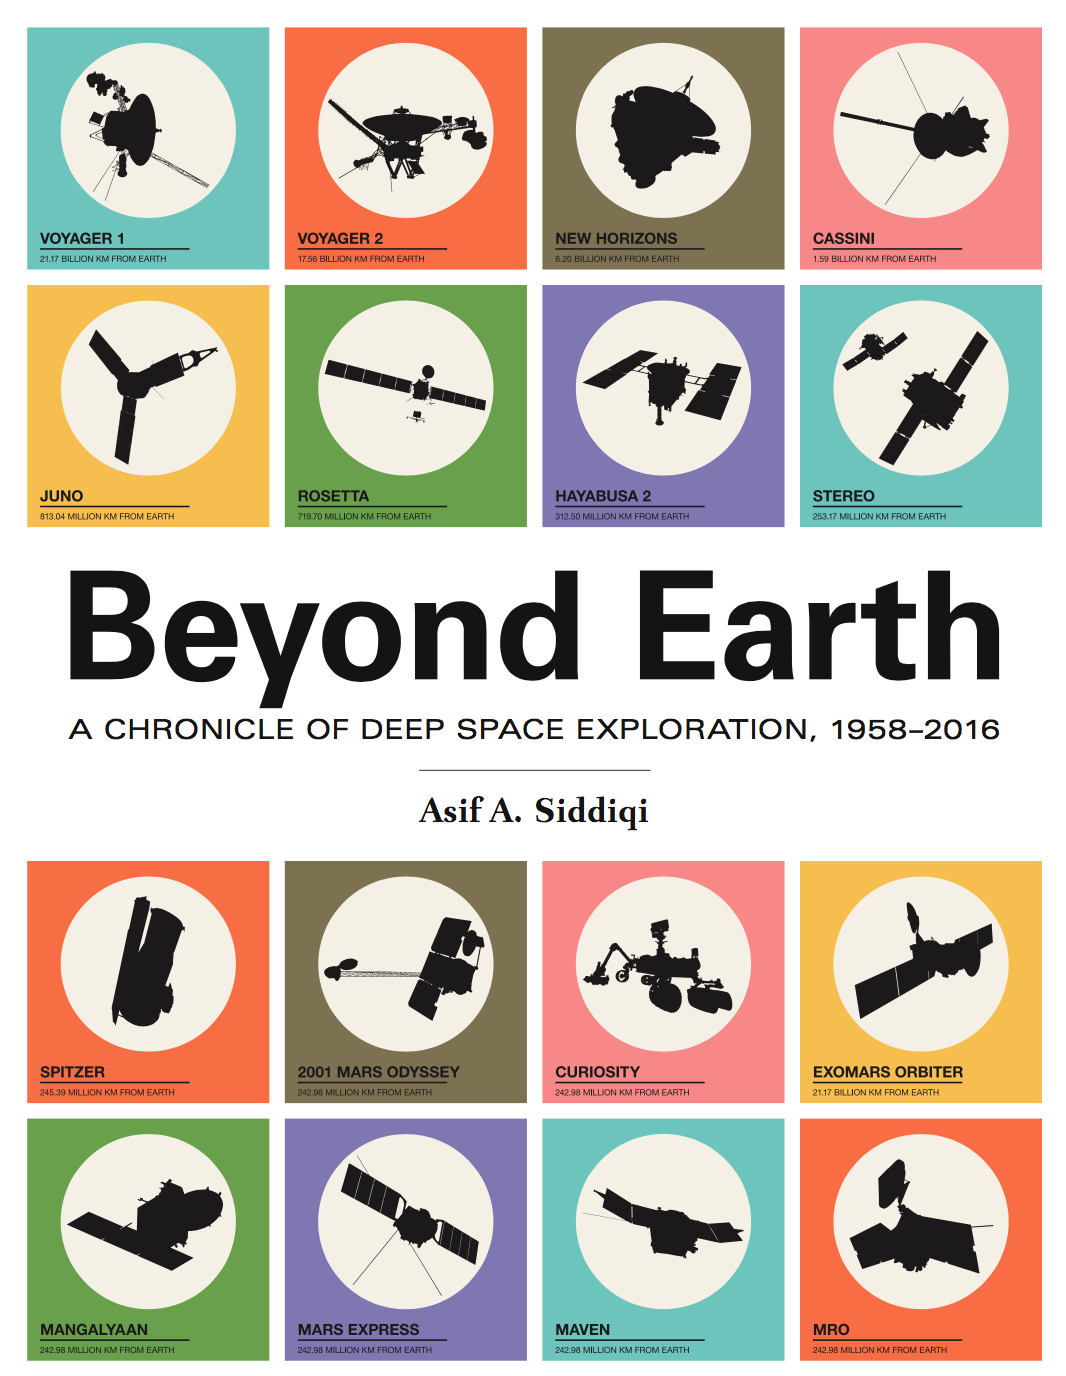 Colorful book cover for Beyond Earth: A Chronicle of Deep Space Exploration. It features spacecraft cutouts against a bright primary colors.